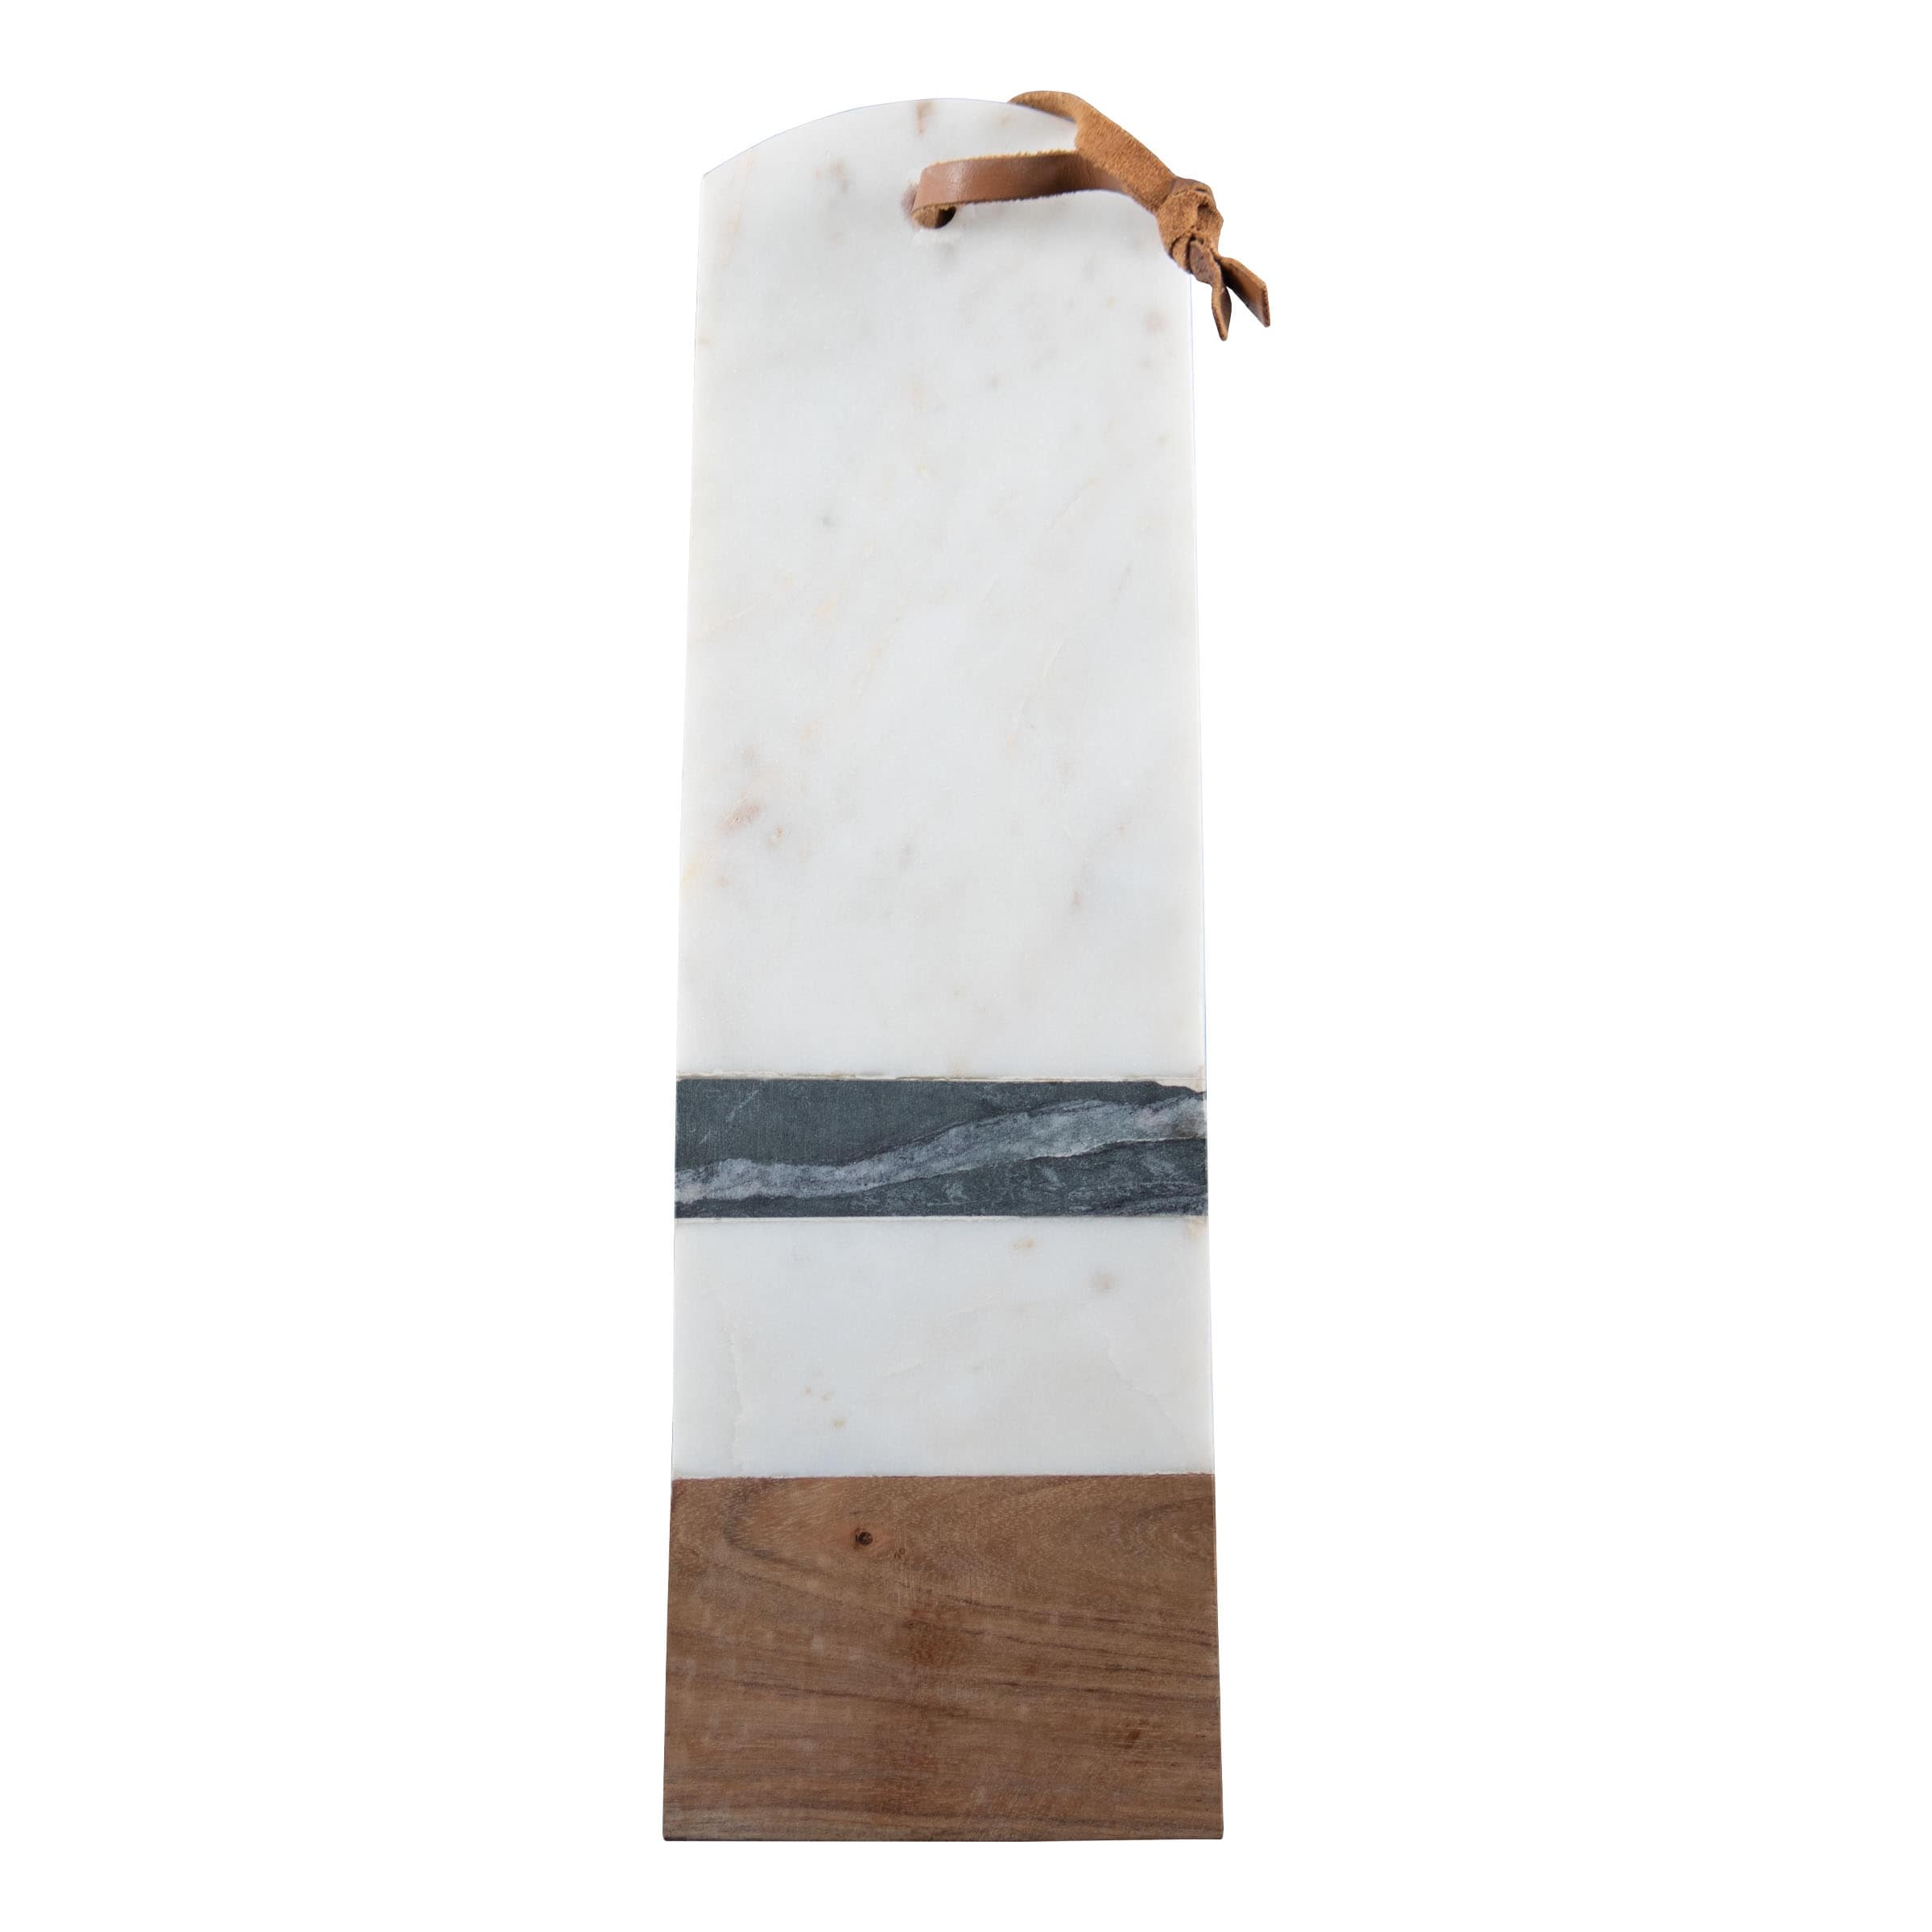 https://ak1.ostkcdn.com/images/products/is/images/direct/9b39517f02a8220d55dc997b805cfcff83649016/Foreside-Home-%26-Garden-Small-White-Marble-and-Wood-Kitchen-Serving-Cutting-Board.jpg